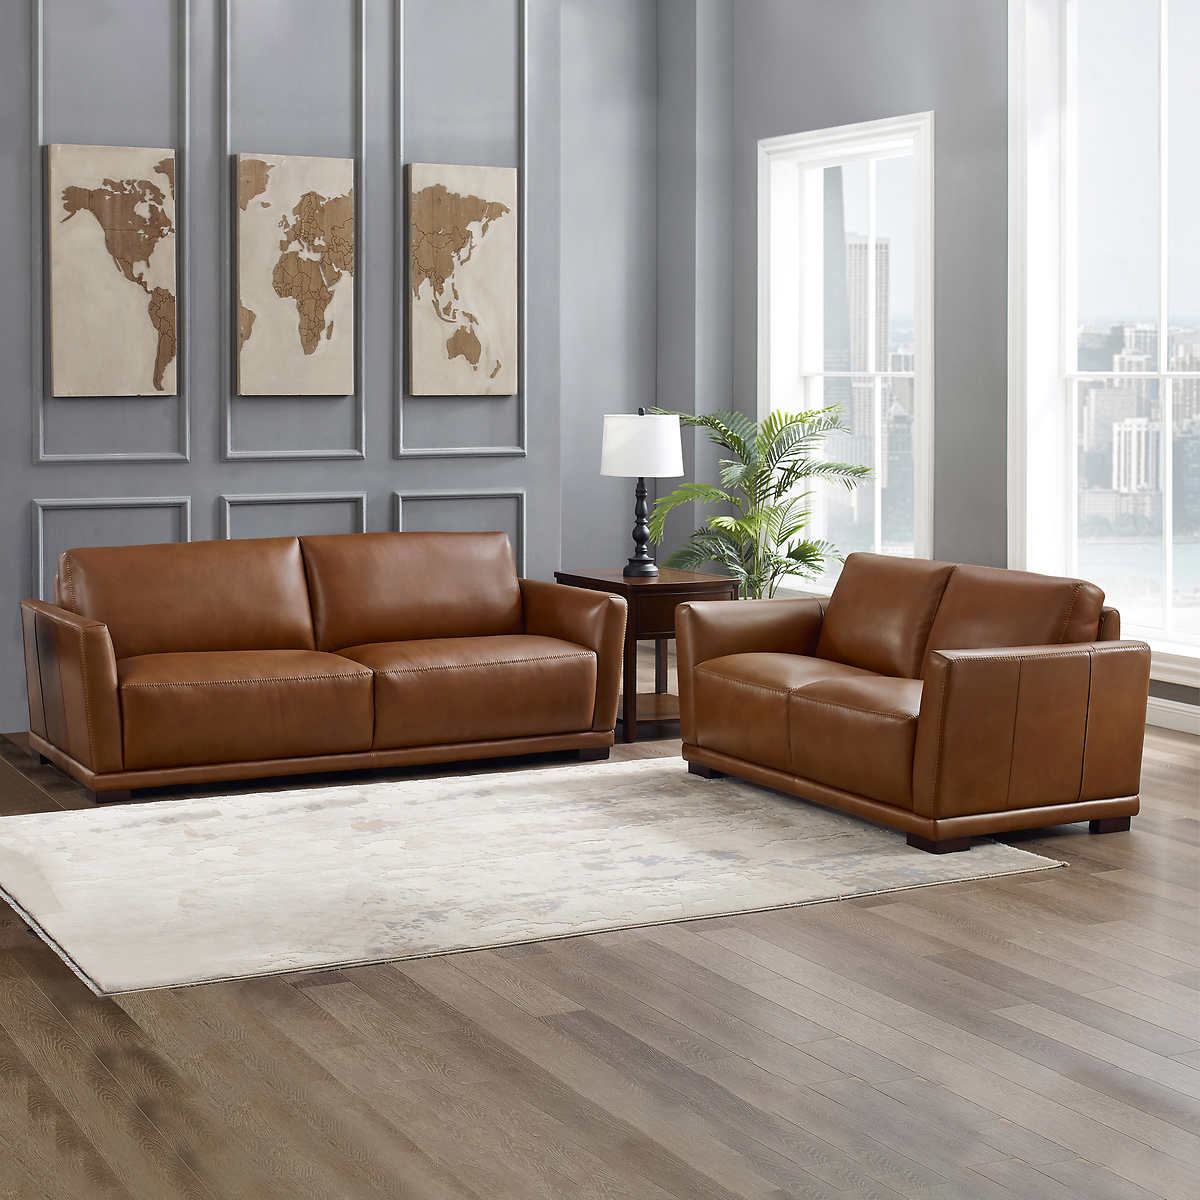 Colby 2 Piece Leather Sofa And Loveseat, Leather Couch Loveseat Set